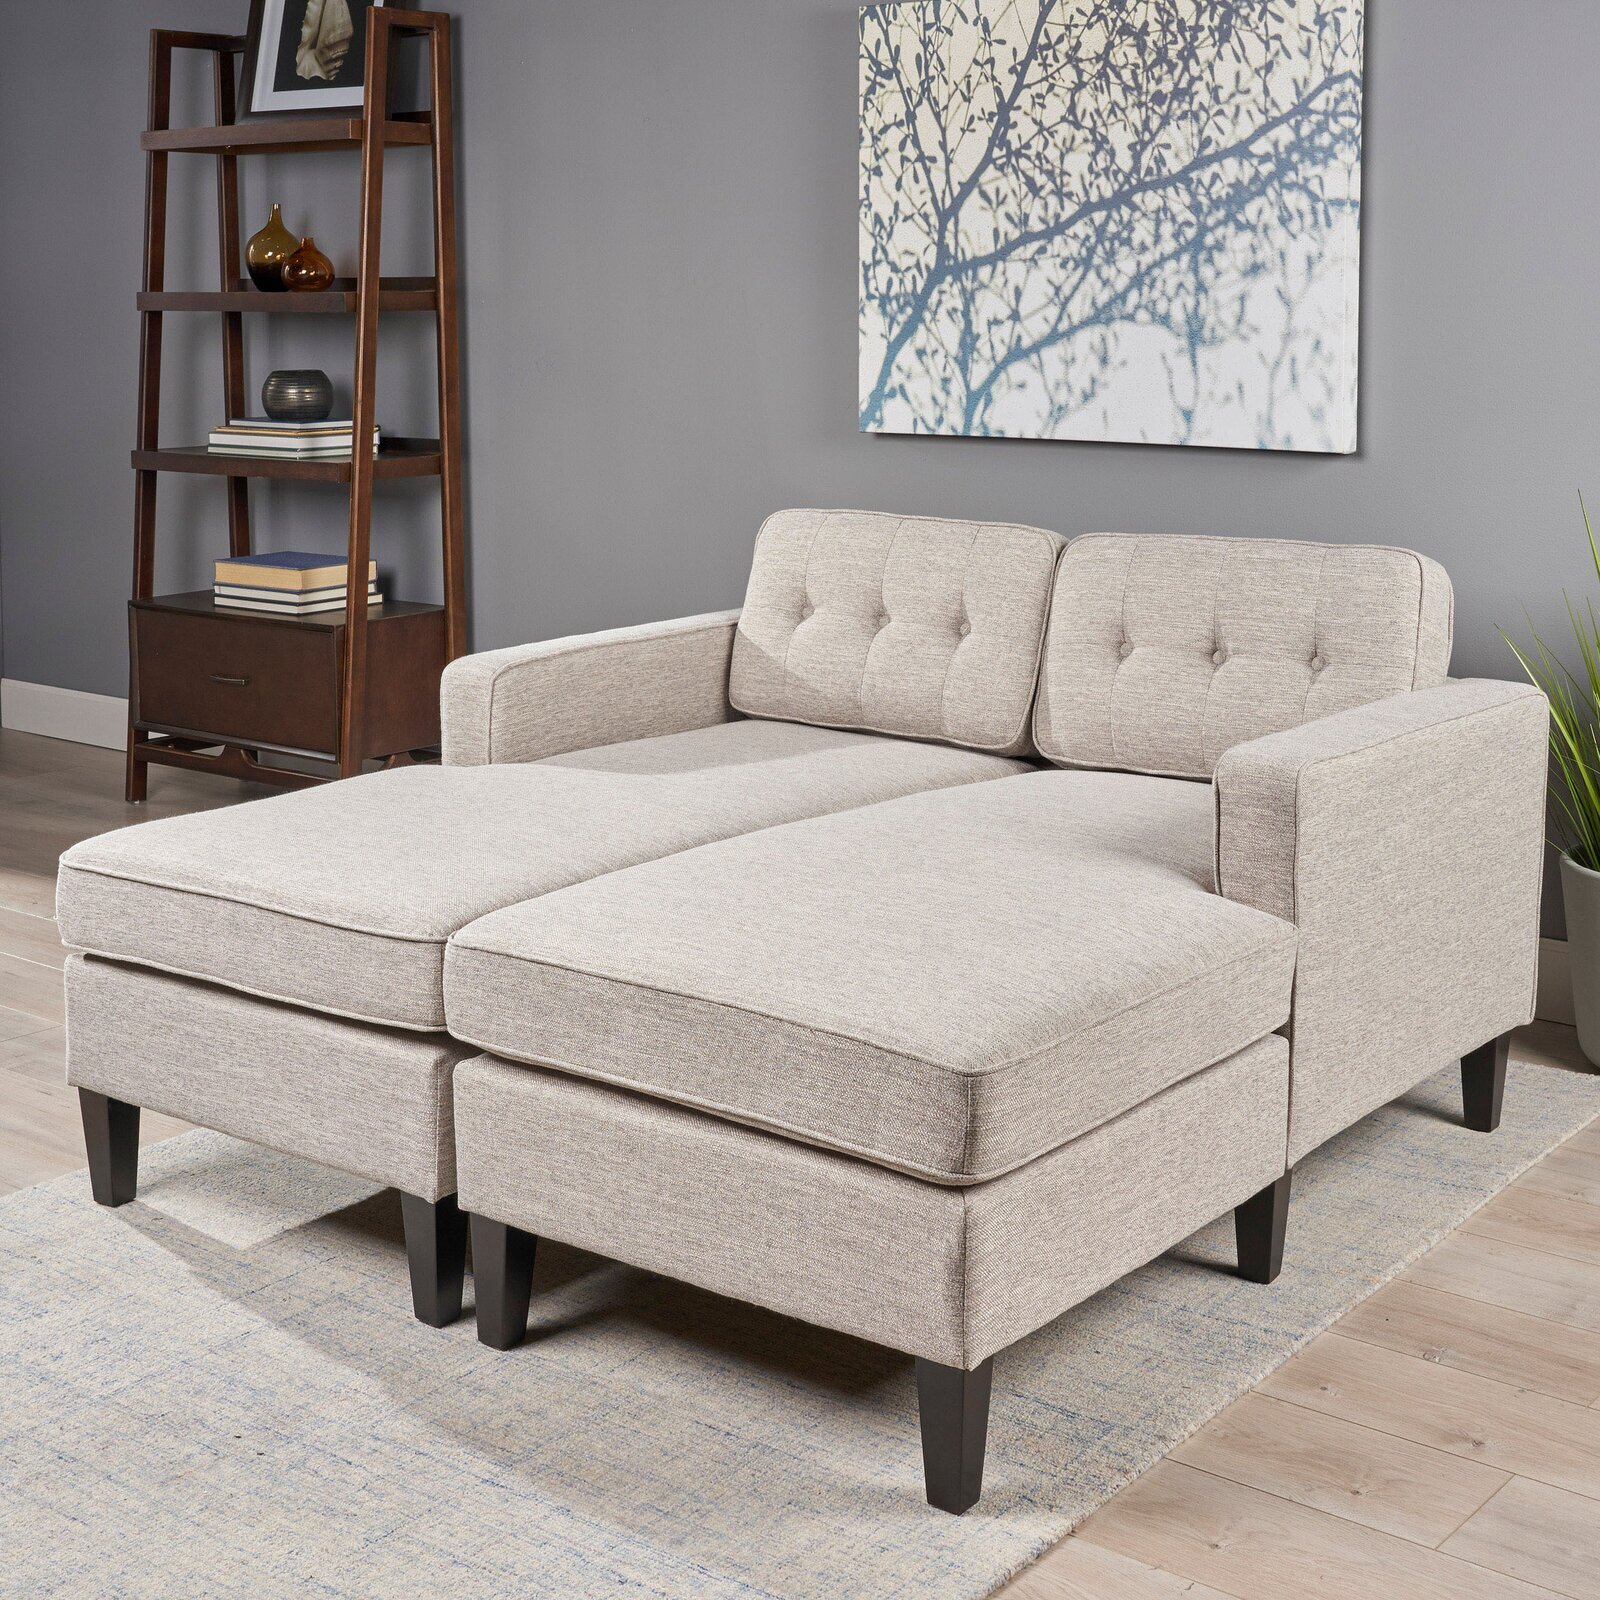 Gray Double Chaise Lounge